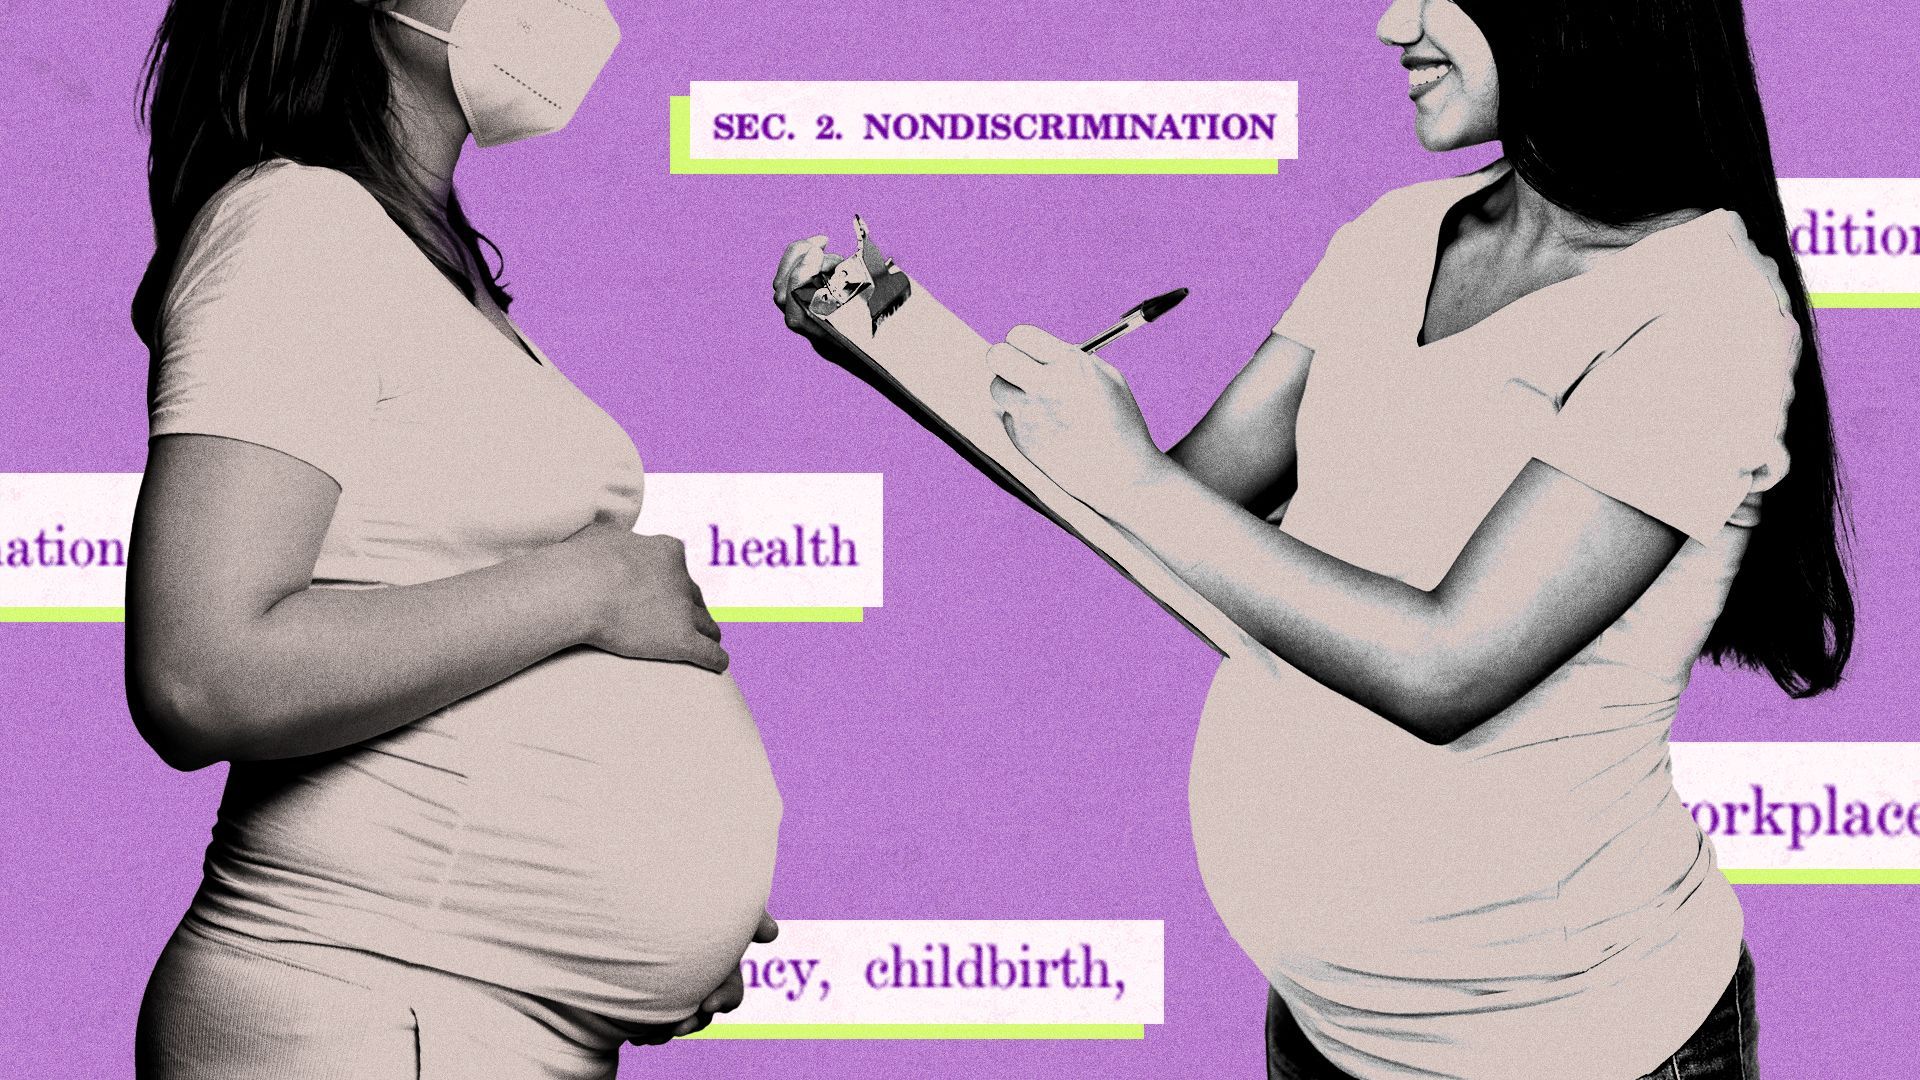 Illustration of two pregnant people: one wears a mask and the other is smiling and holding a clipboard. Fragments of text from the Pregnant Workers Fairness Act are in the background.